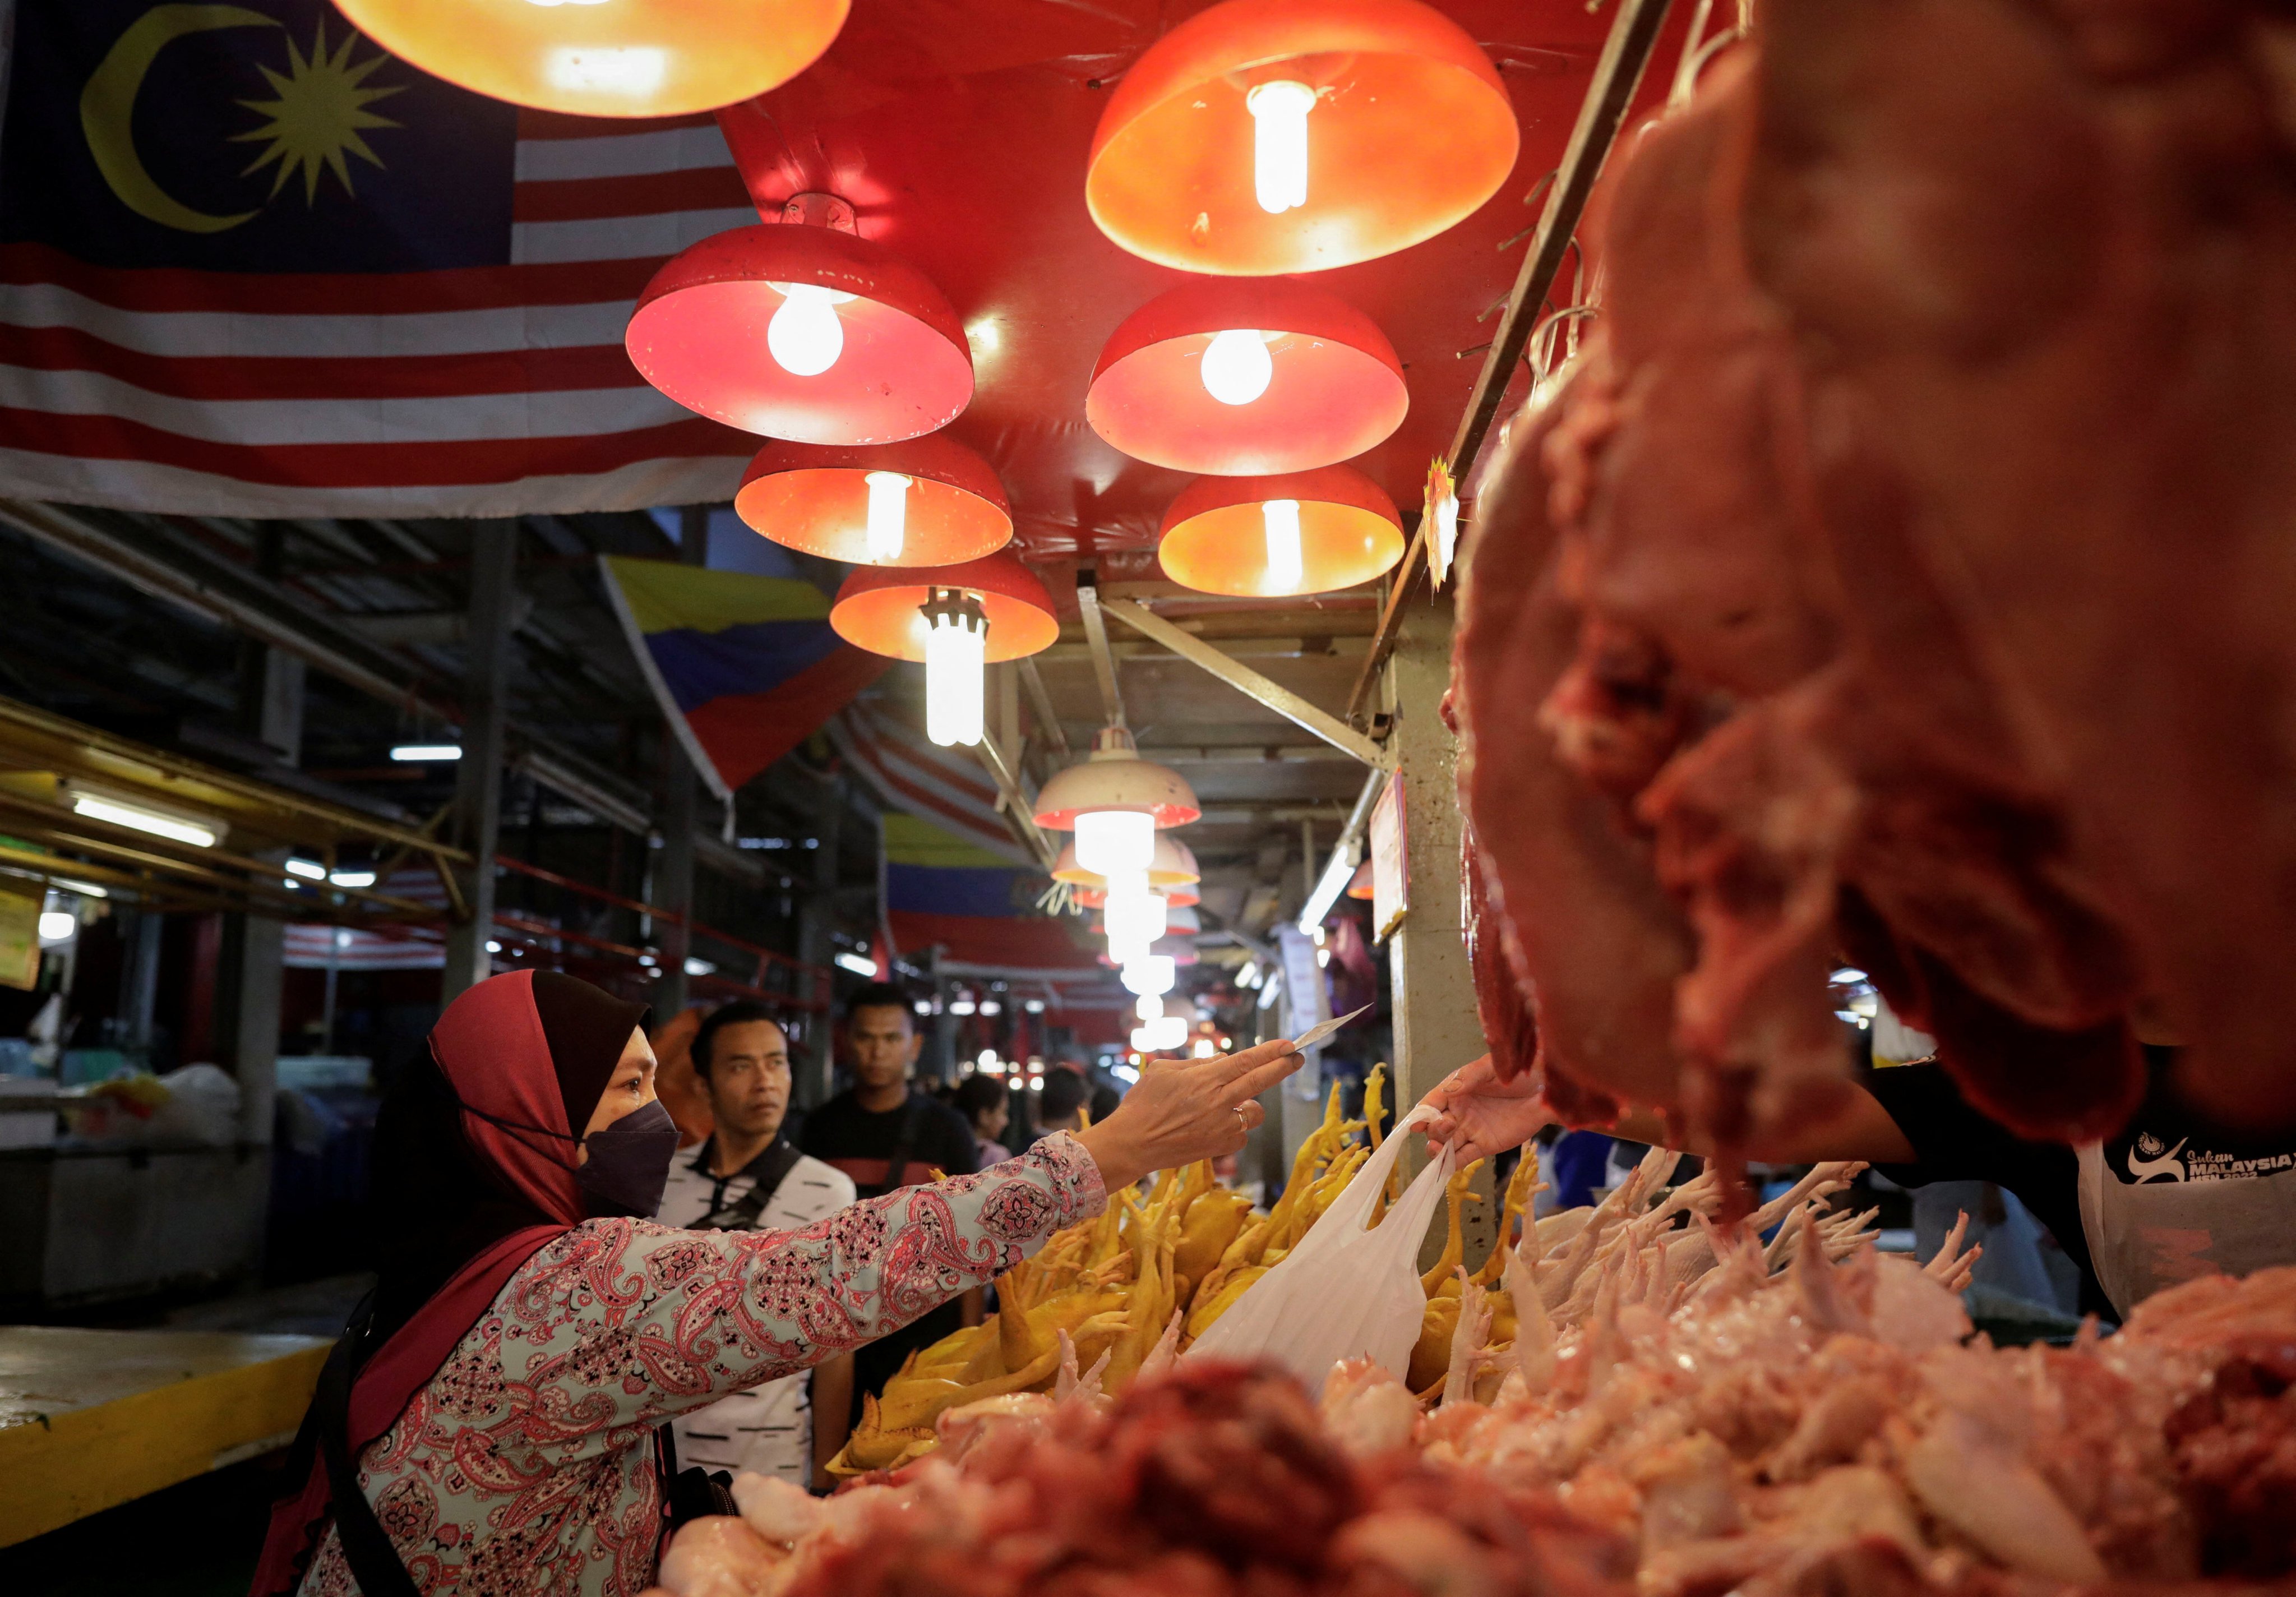 Many low-income families in Kuala Lumpur are struggling to afford basic foods like rice and chicken amid soaring living costs. Photo: Reuters